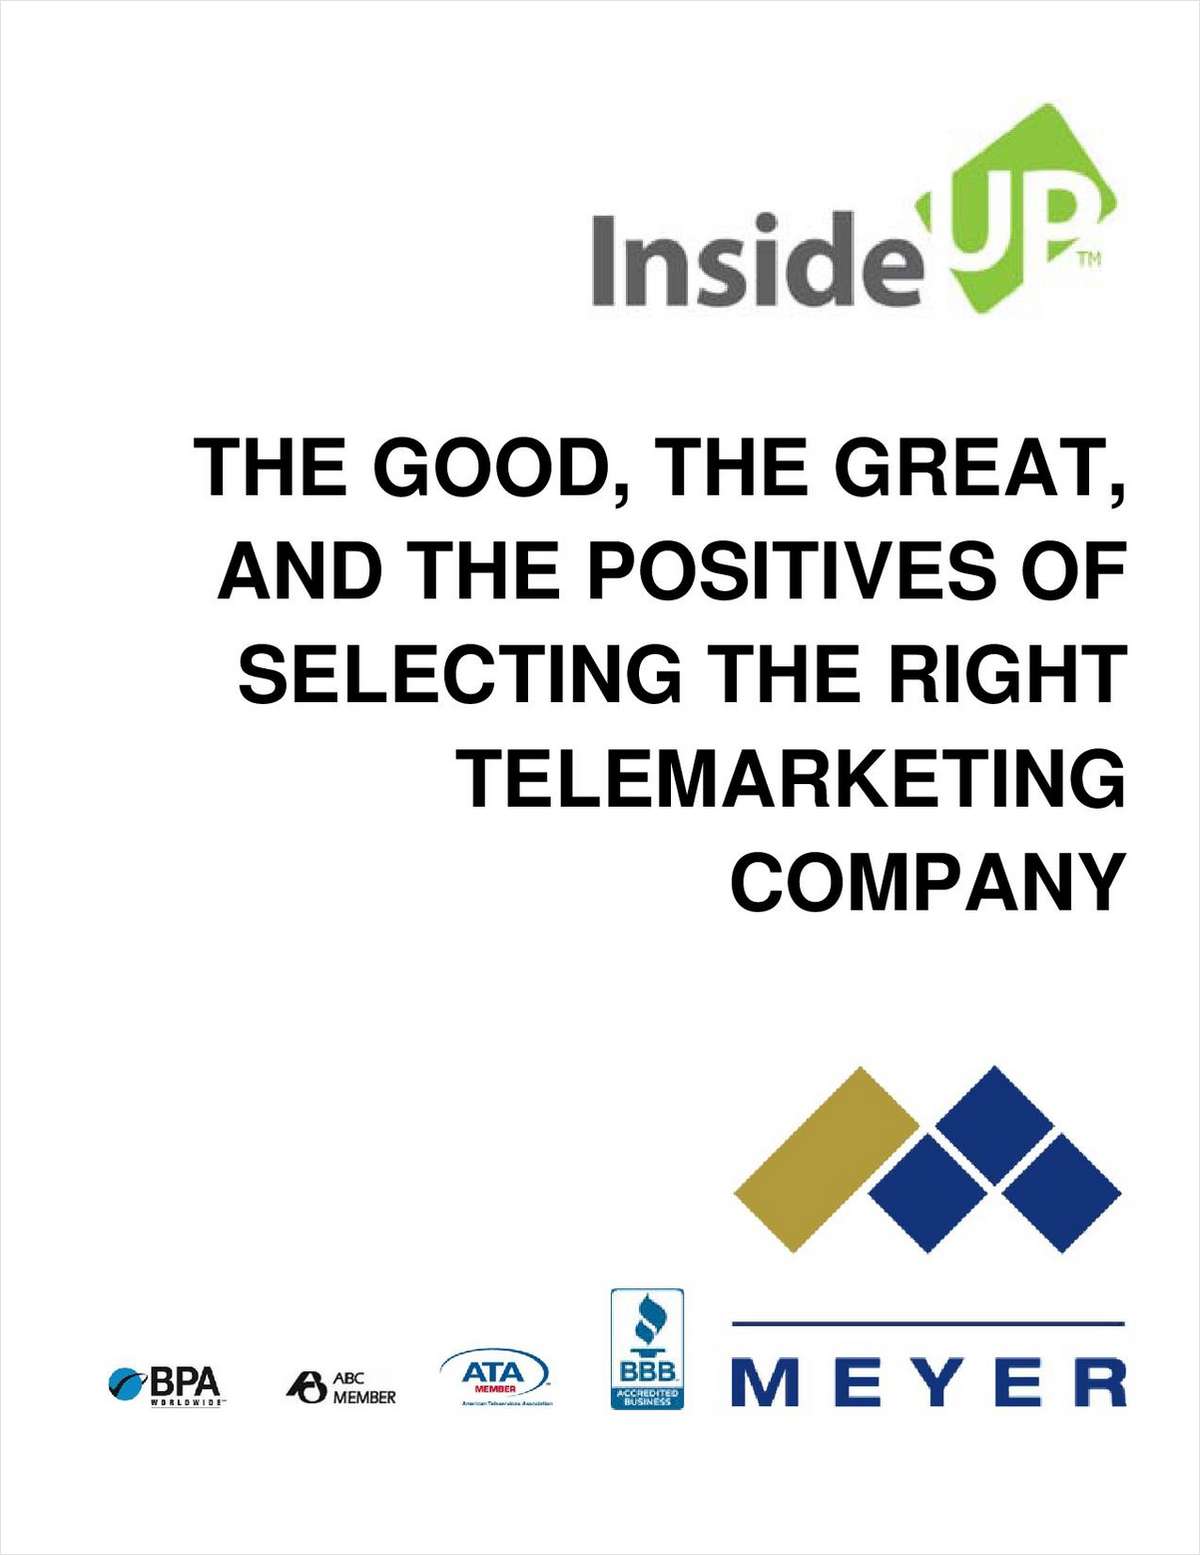 The Good, The Great And The Positives of Selecting The Right Telemarketing Company